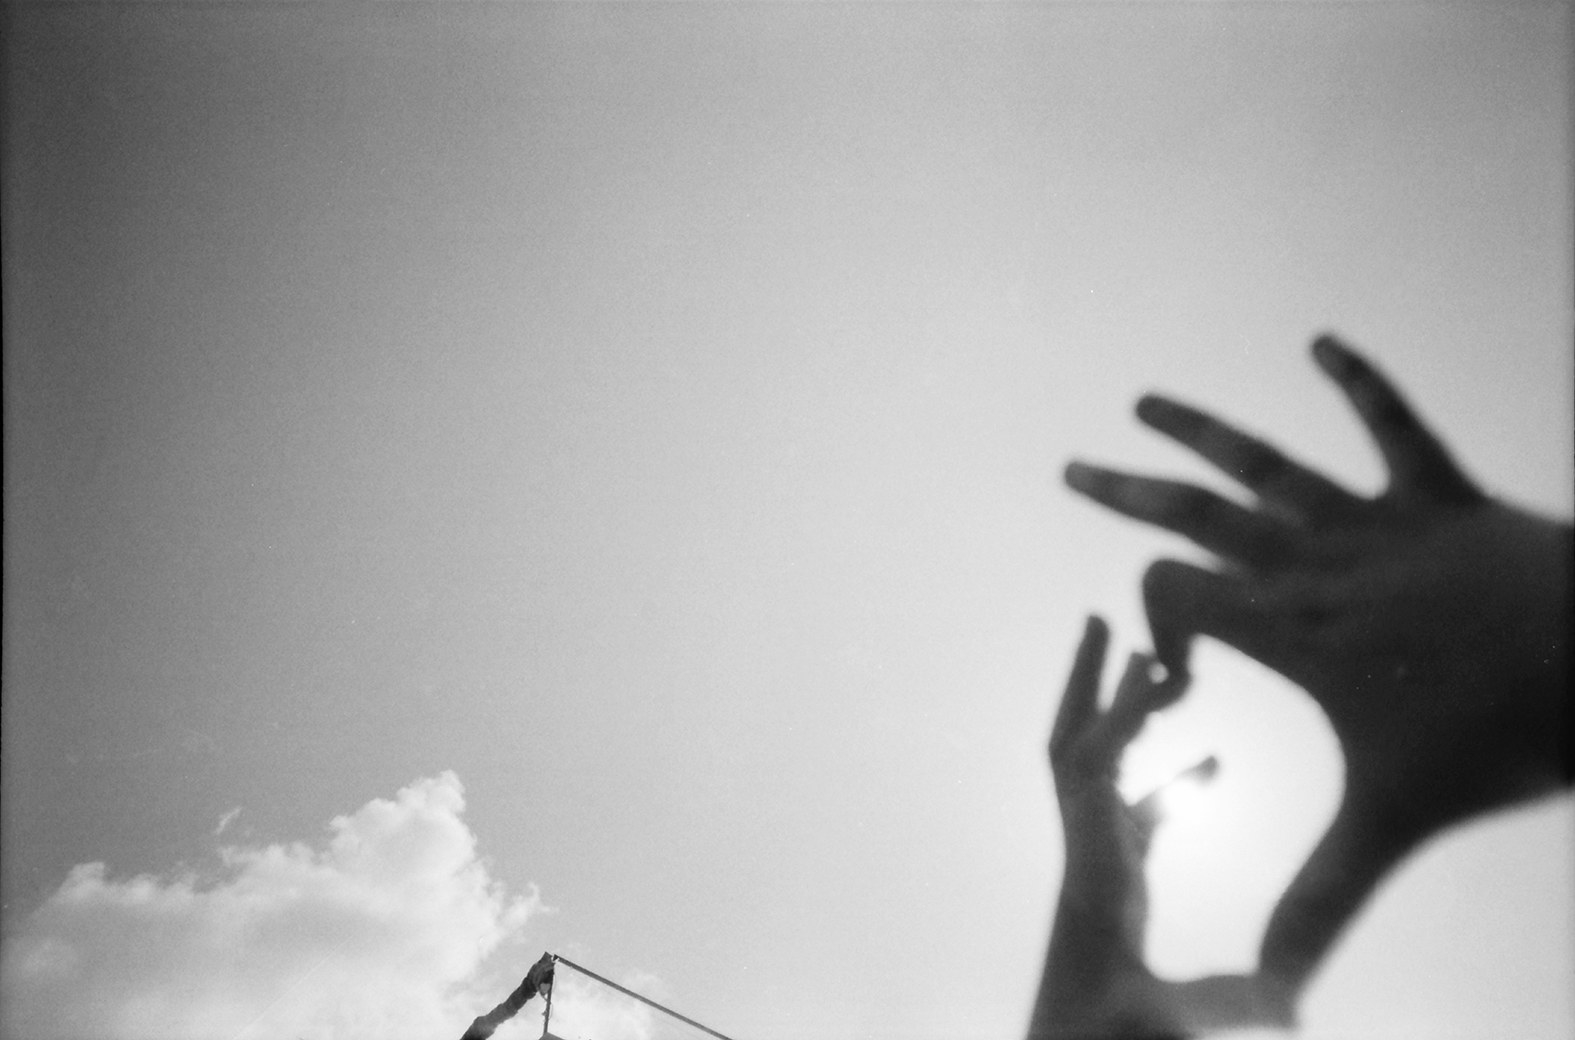 Hands make a shape in the air with clouds in the background